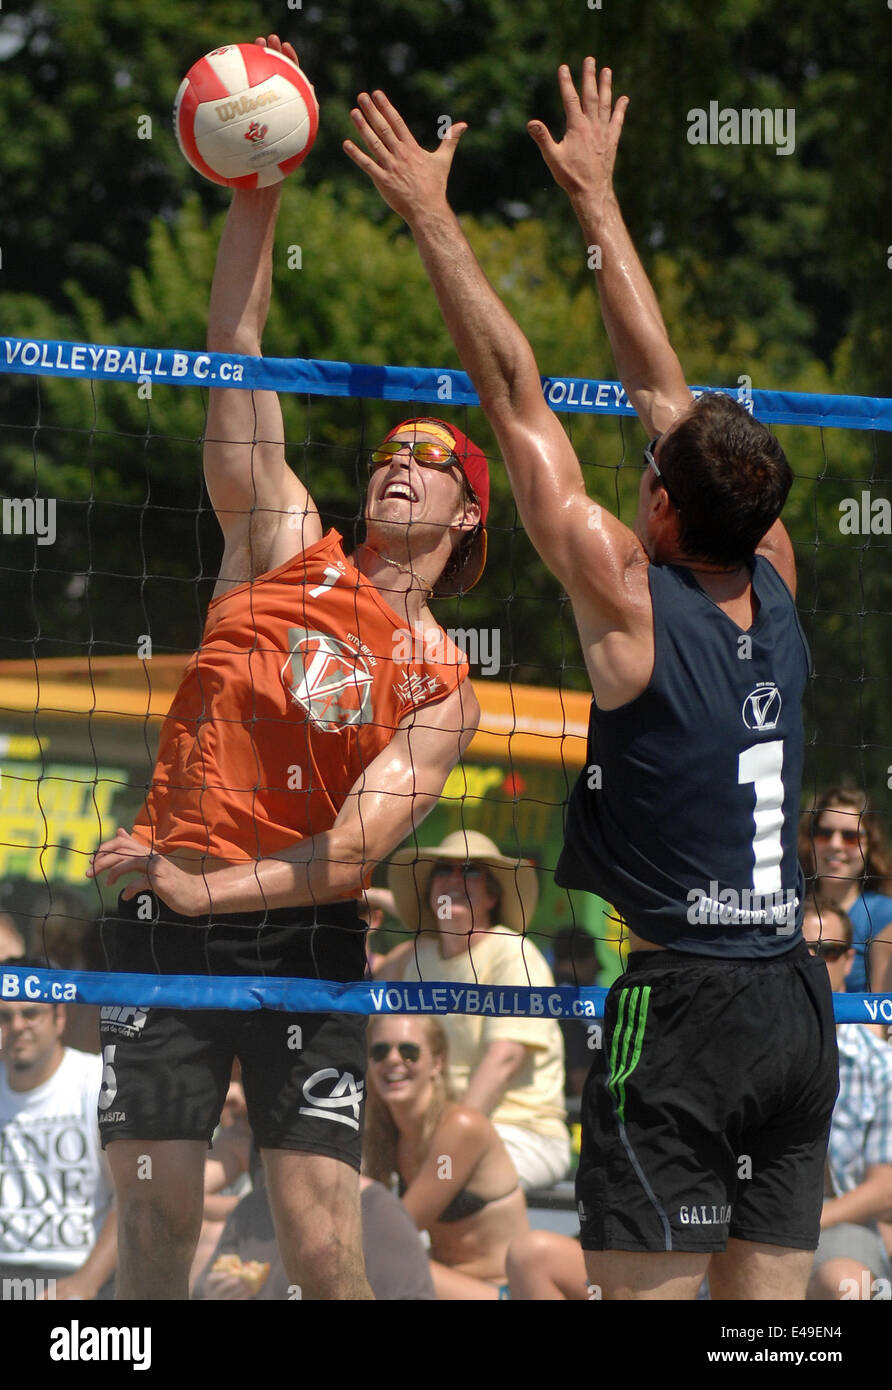 Vancouver, Canada. 6th July, 2014. Players compete during the 2014 Vancouver Open International Beach Volleyball tournament in Vancouver, Canada, on July 6, 2014. © Sergei Bachlakov/Xinhua/Alamy Live News Stock Photo